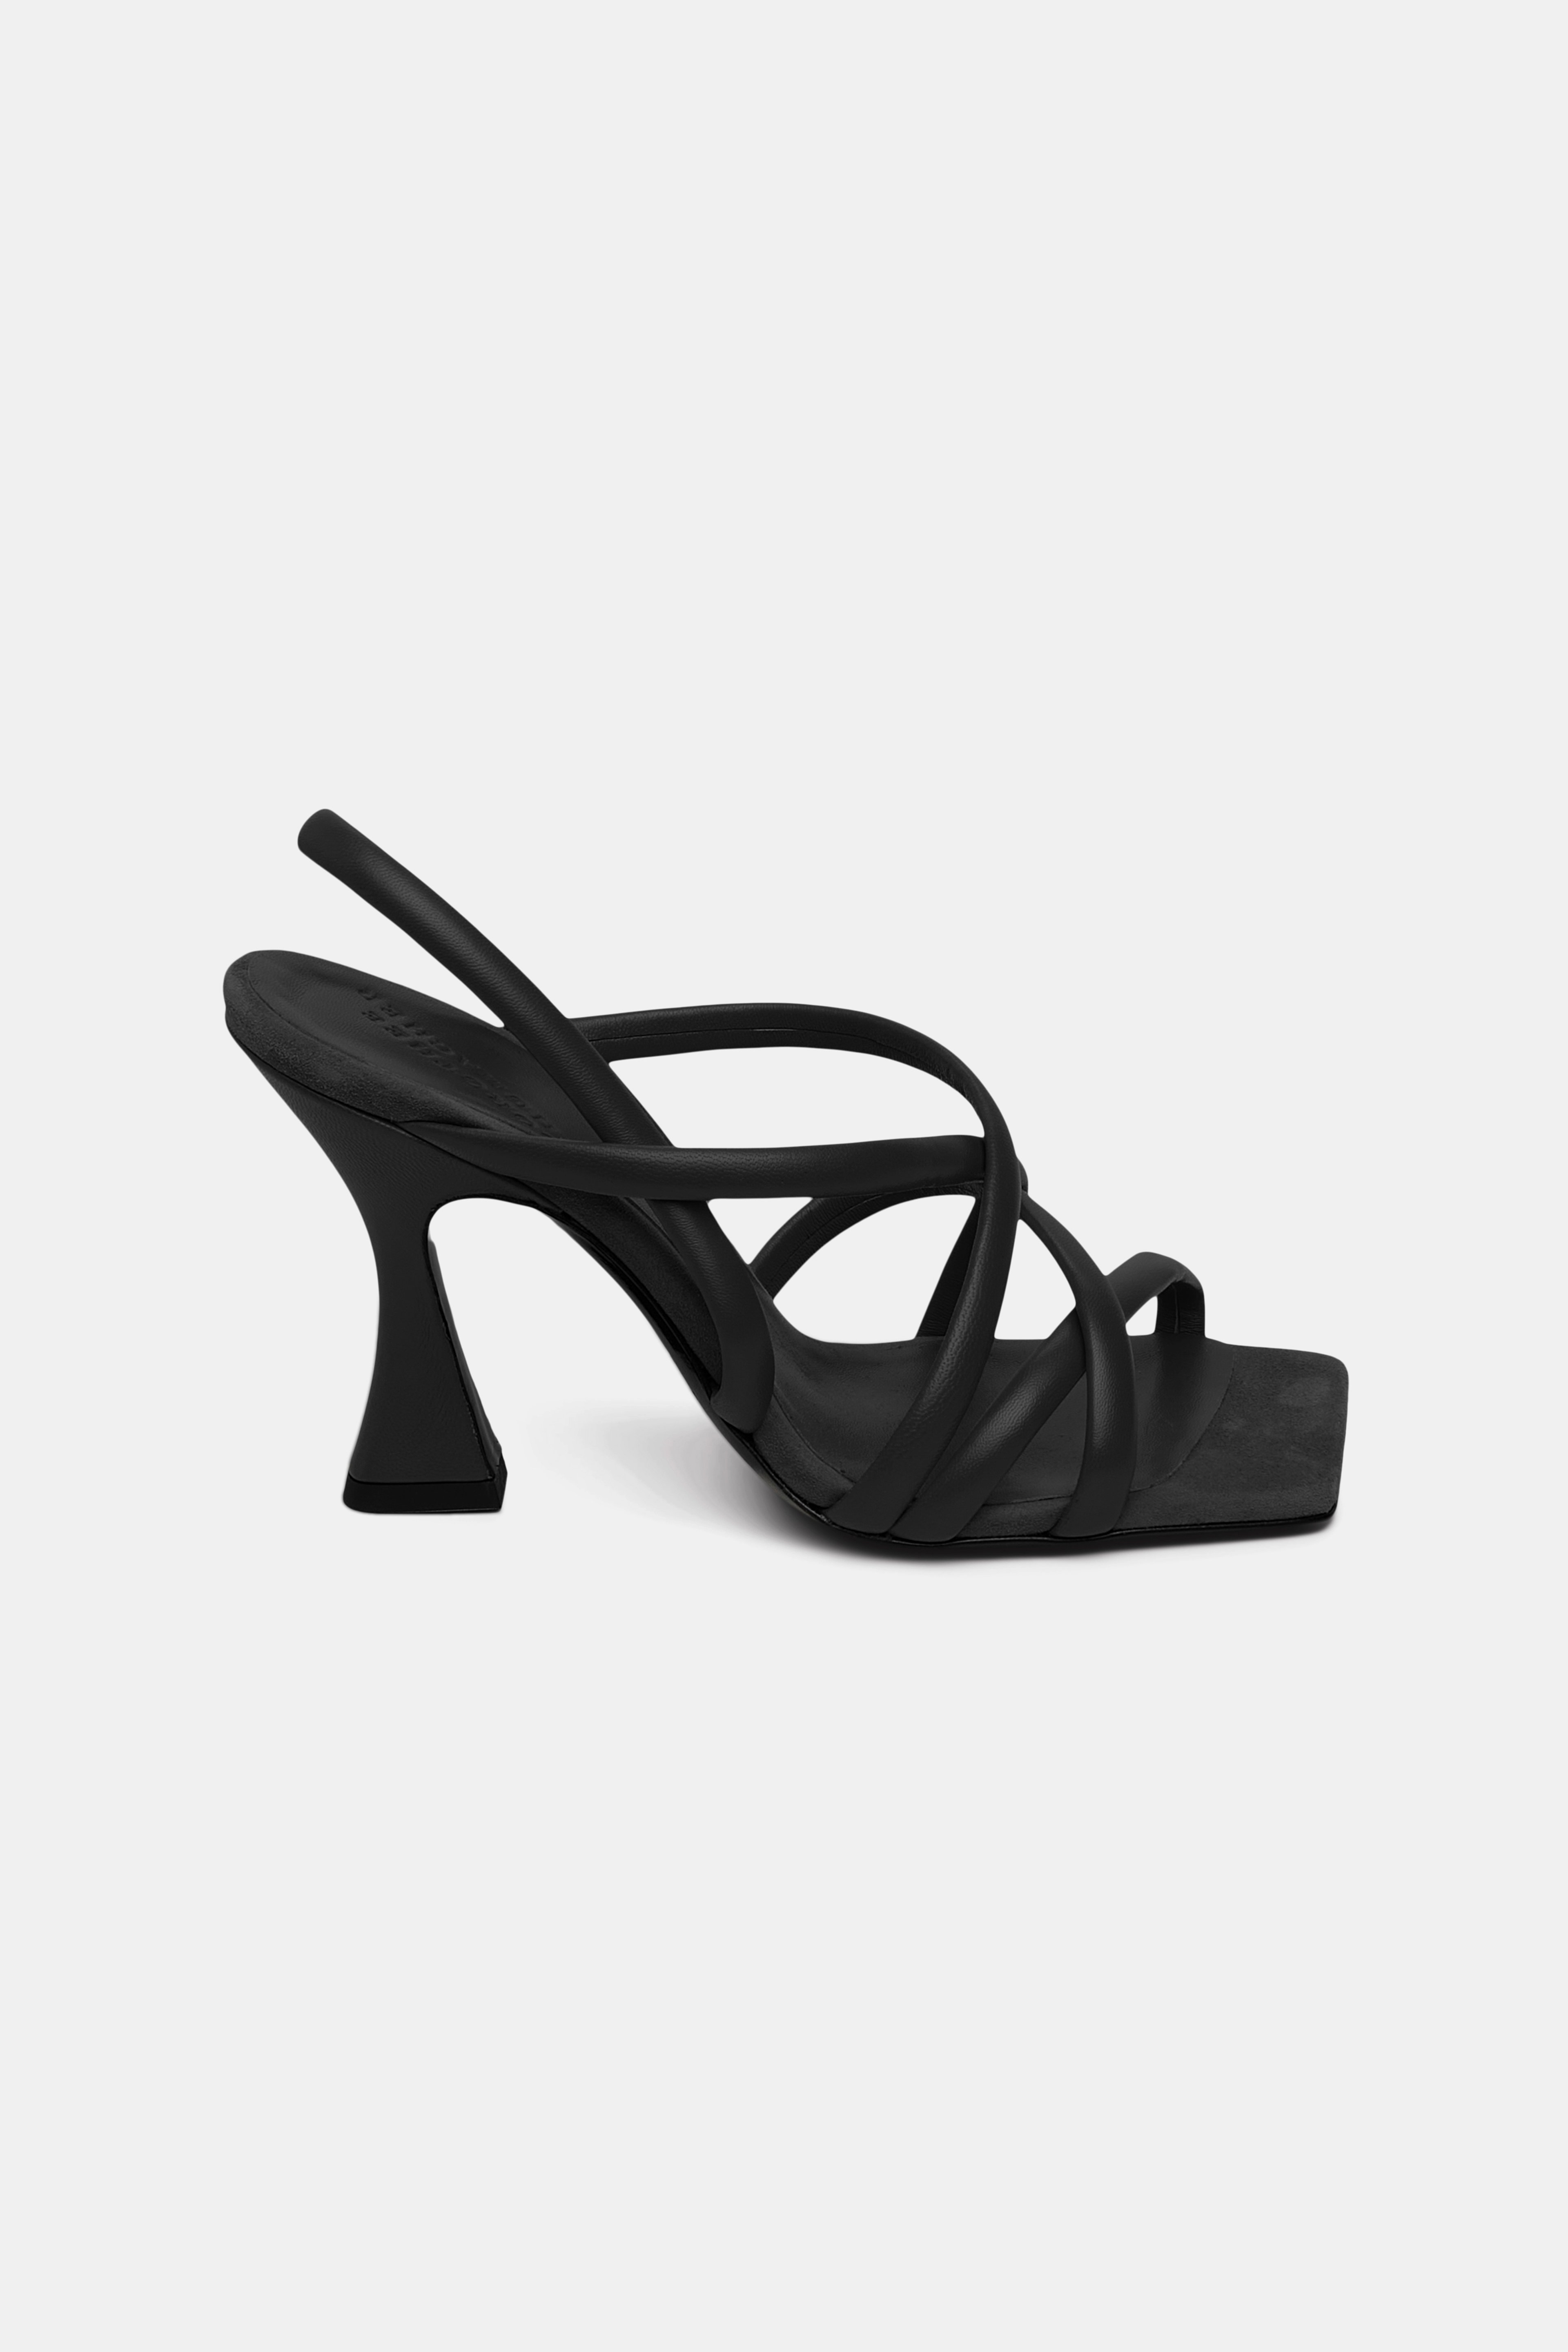 Dorothee Schumacher Puffed Leather Sandals With Louis Heel In Black